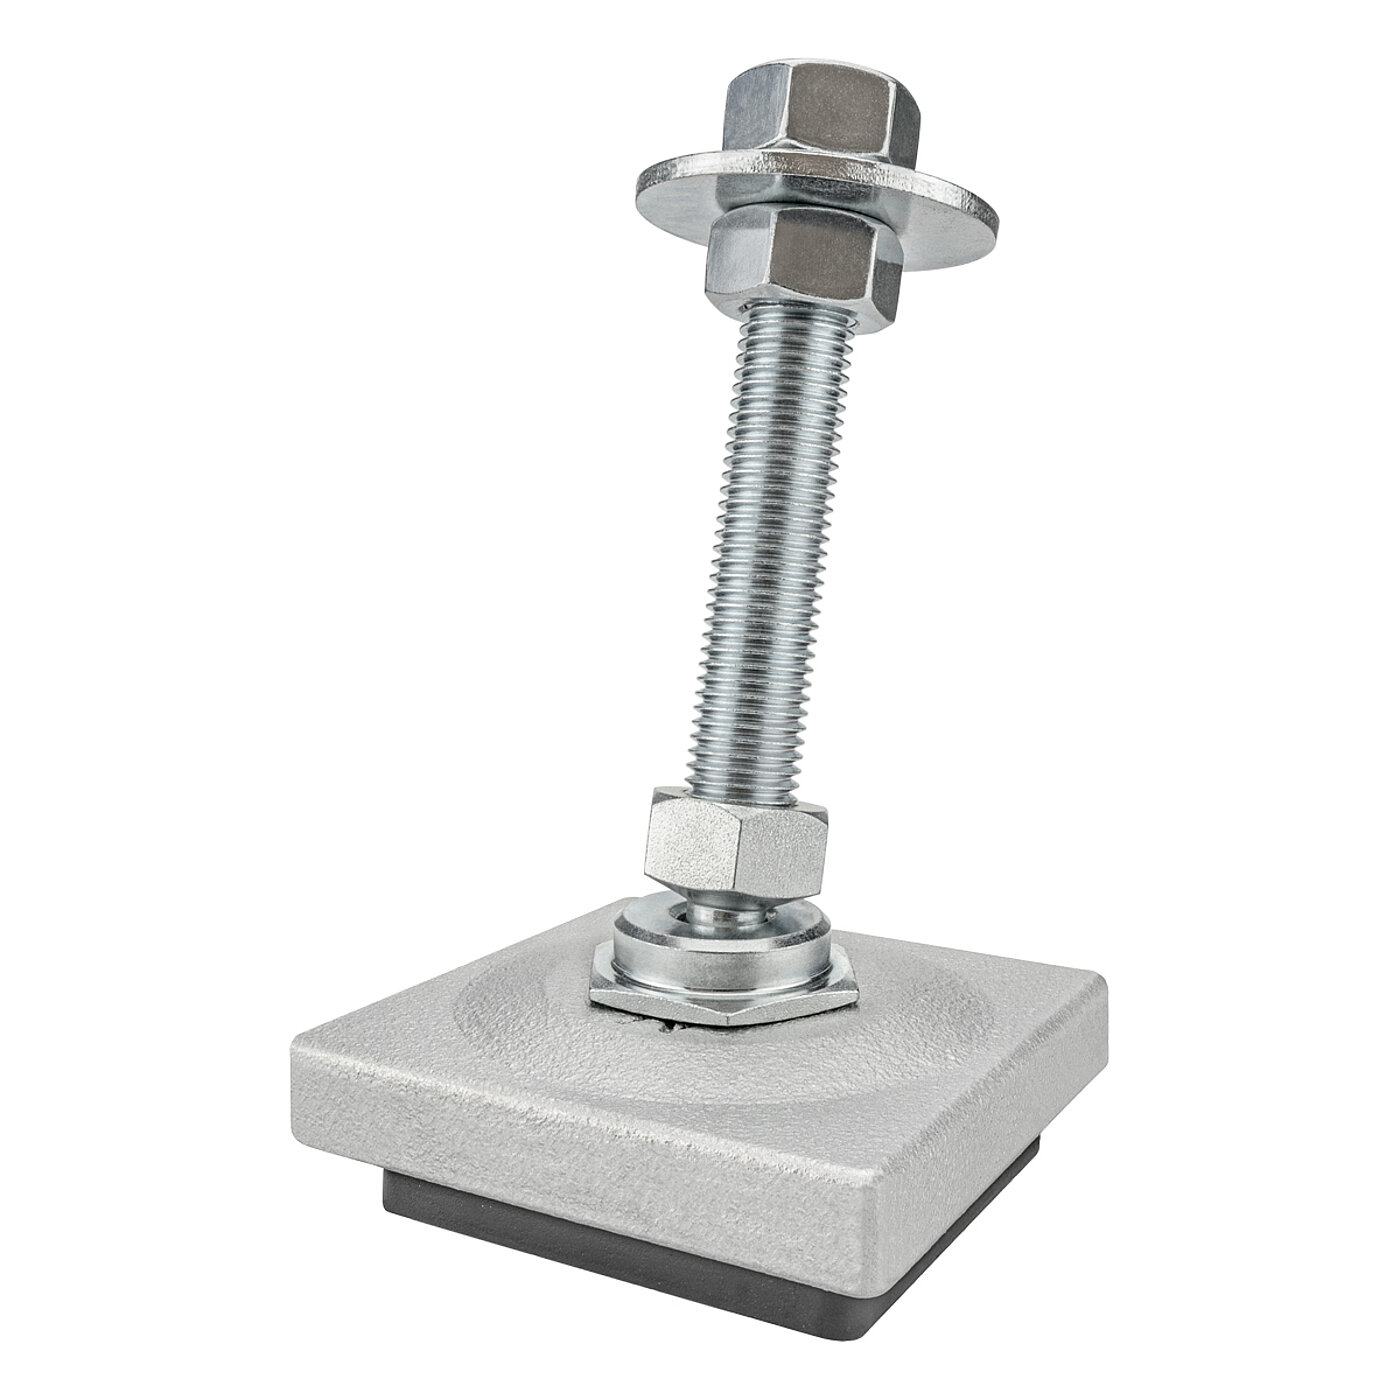 a square, silver-lacquered levelling element made of cast iron, with a pendulum-action zinc-coated levelling screw placed in a pressure fitting with safety ring on top of the cast iron corpus, and black elastomer for vibration damping at the bottom, isolated on white background